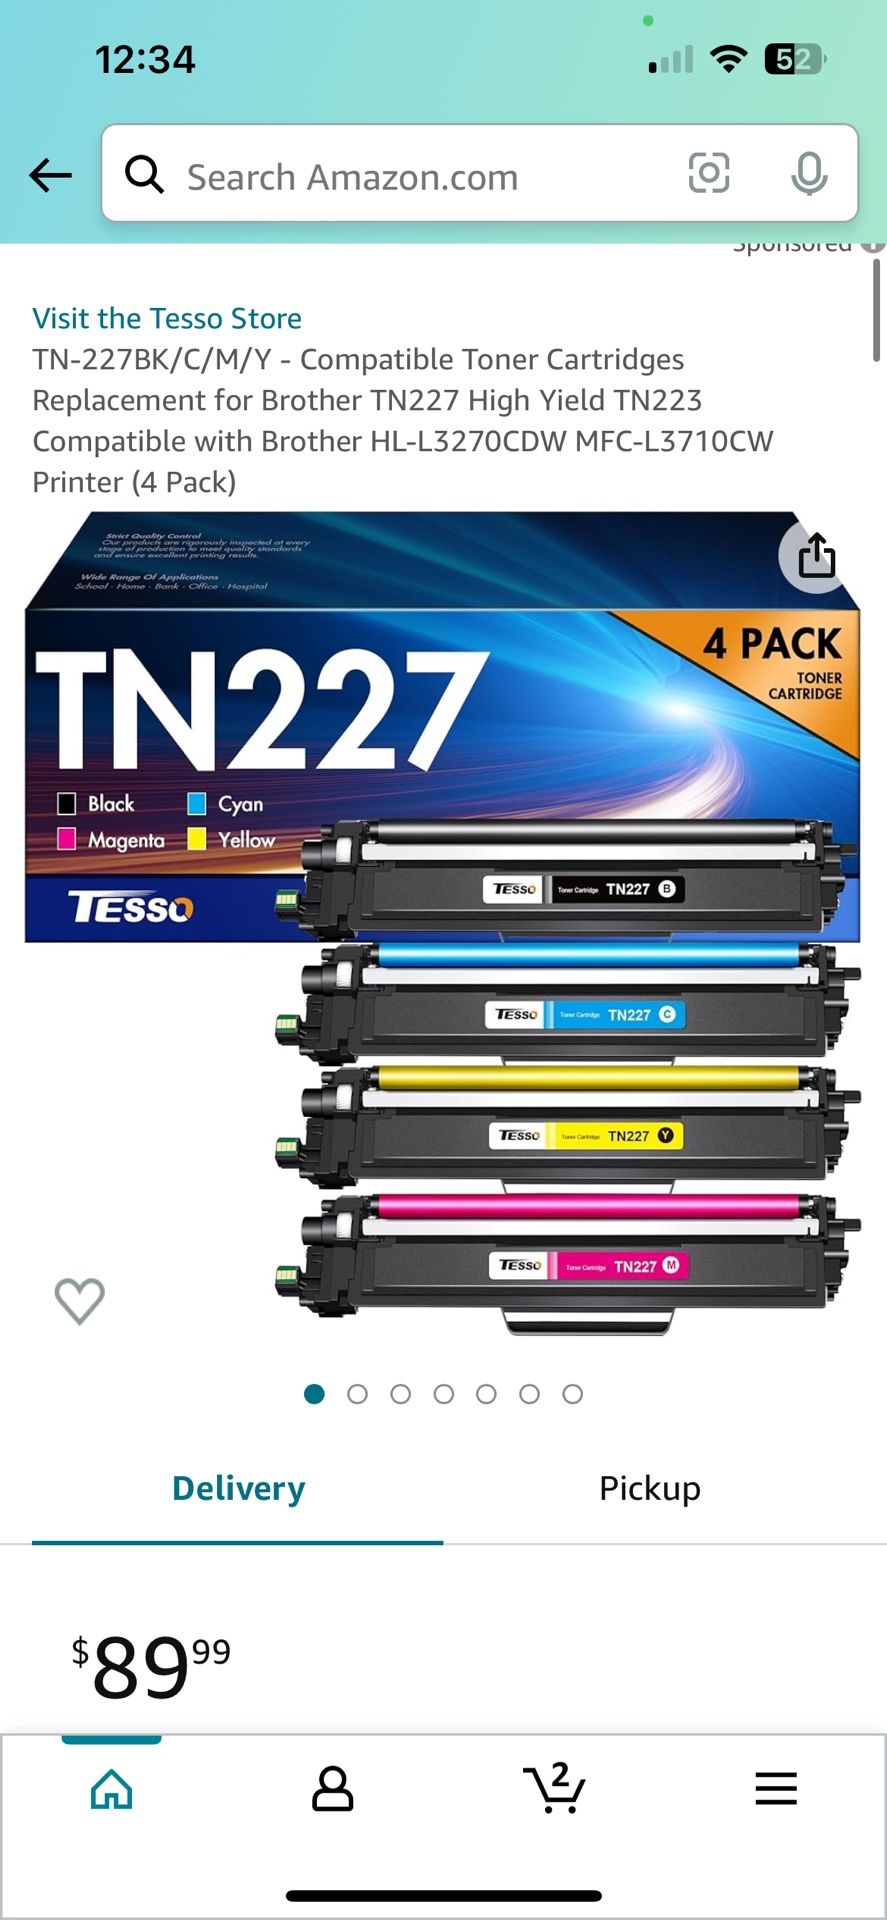 TN-227BK/C/M/Y - Compatible Toner Cartridges Replacement for Brother TN227 High Yield TN223 Compatible with Brother HL-L3270CDW MFC-L3710CW Printer (4